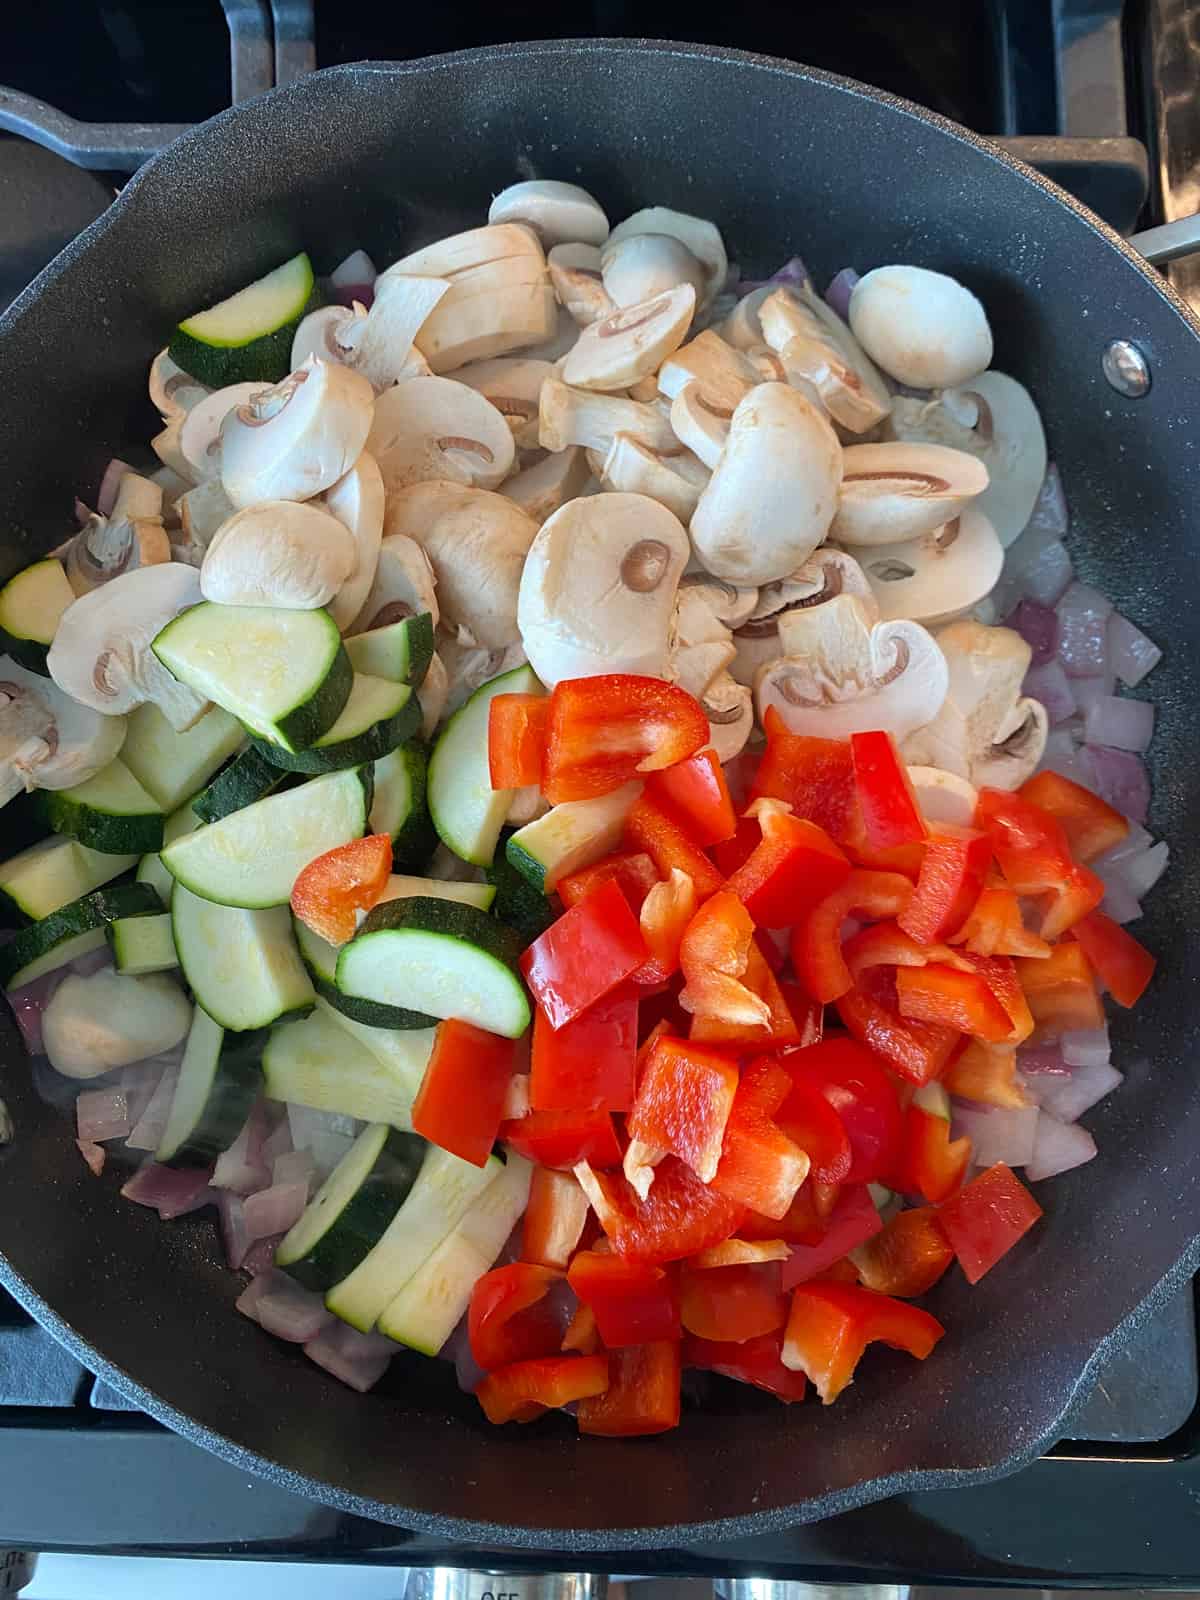 Chopped vegetables added to sauteed onions, in a pan.